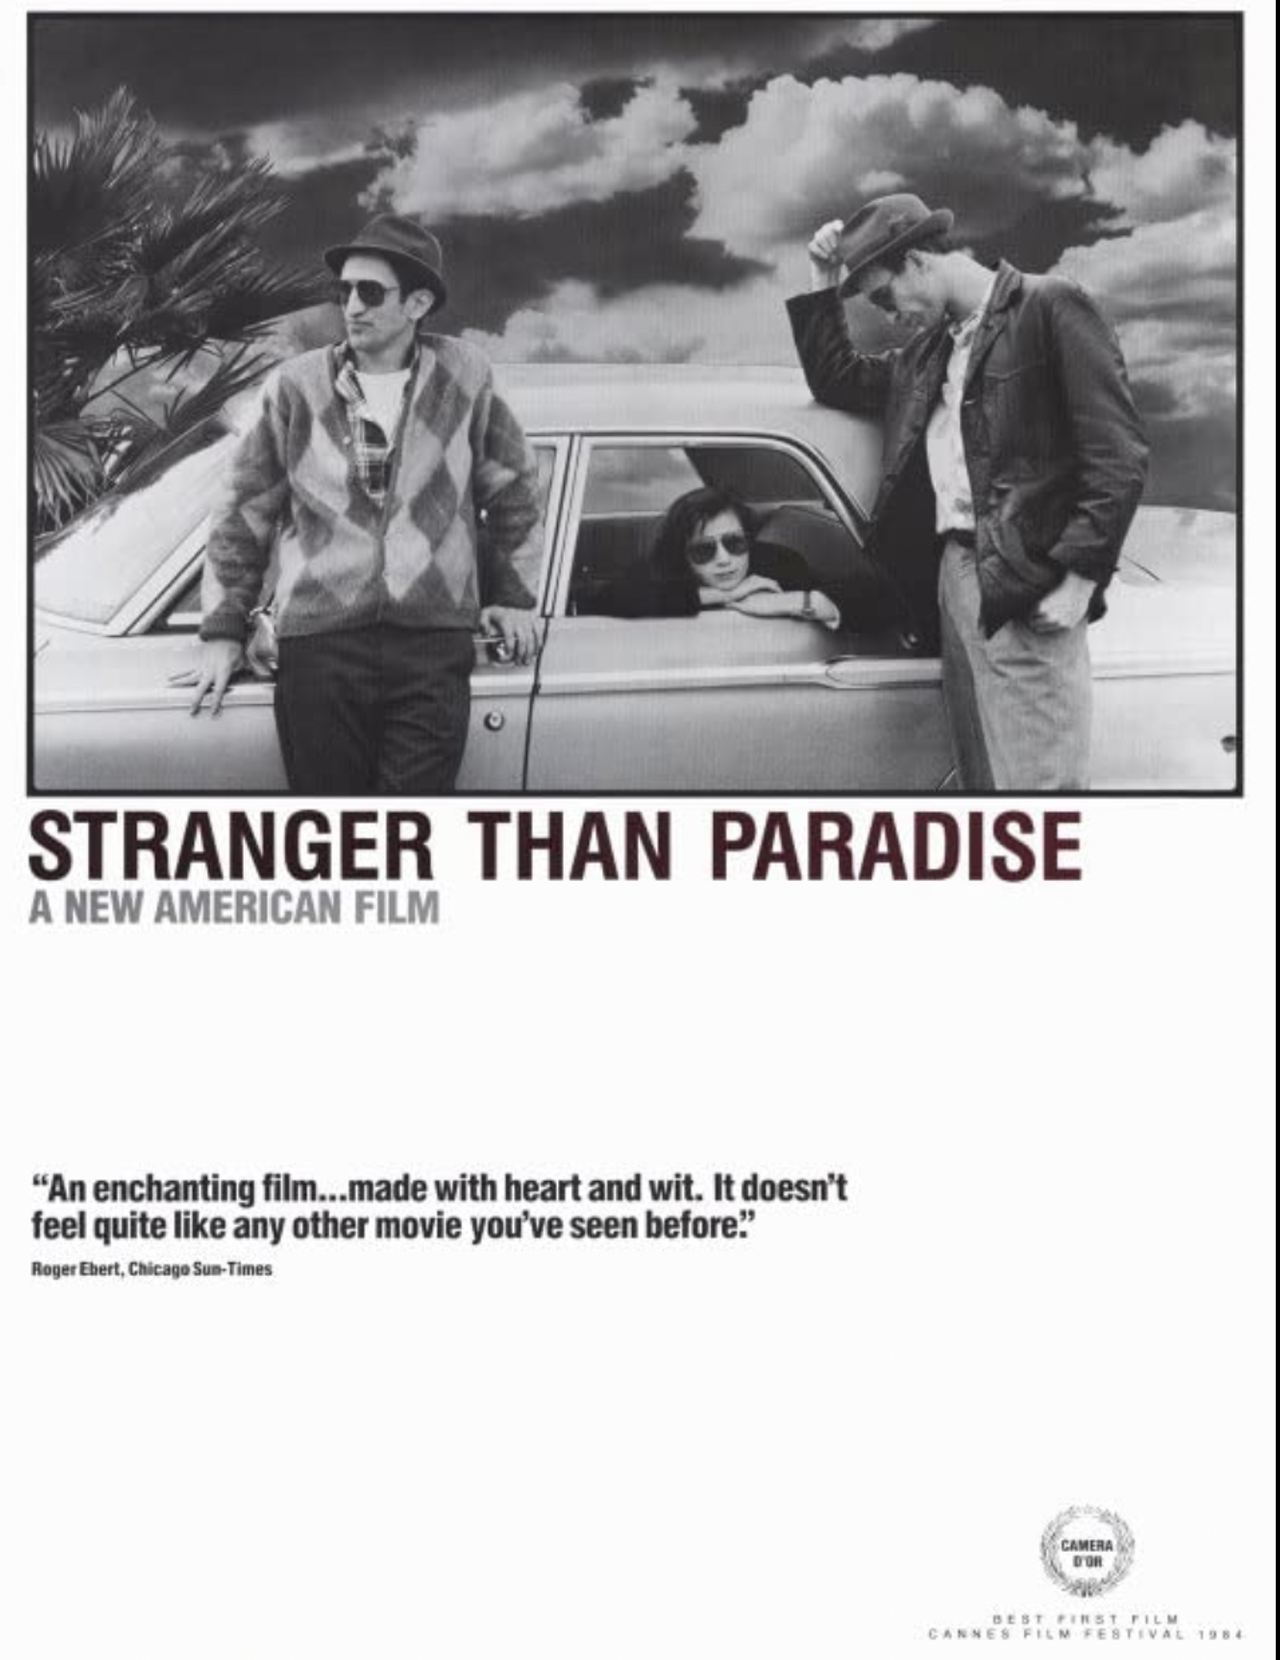  Stranger Than Paradise (1984) 
This cult film put director and Akron native Jim Jarmusch on the map and eventually became one of the most beloved and influential independent films of all time. Jarmusch, who’s also known for Broken Flowers, Paterson and Coffee and Cigarettes , is considered a pioneer of the independent film world. The film includes many shots of Cleveland, including the East Ninth Street pier, the Cleveland Greyhound station, Captain Frank’s restaurant and more. The film is currently streaming on Max and Amazon Prime.